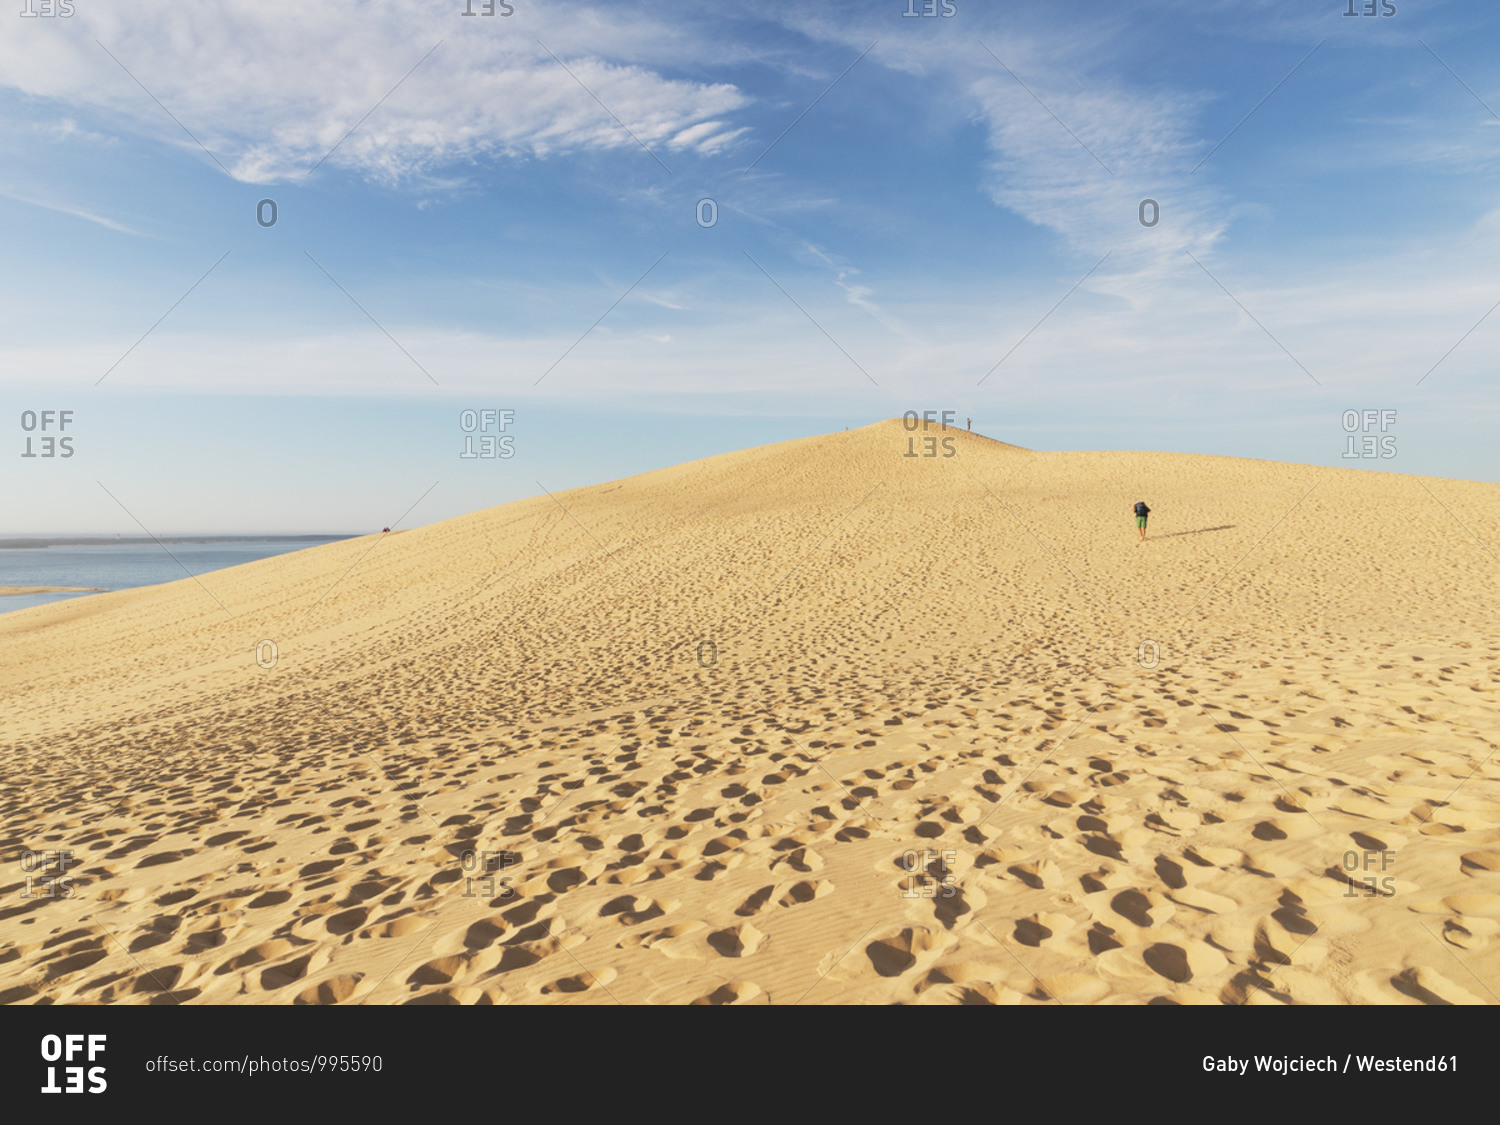 Mid distance view of man walking on sand dune against sky- Nouvelle-Aquitaine- France